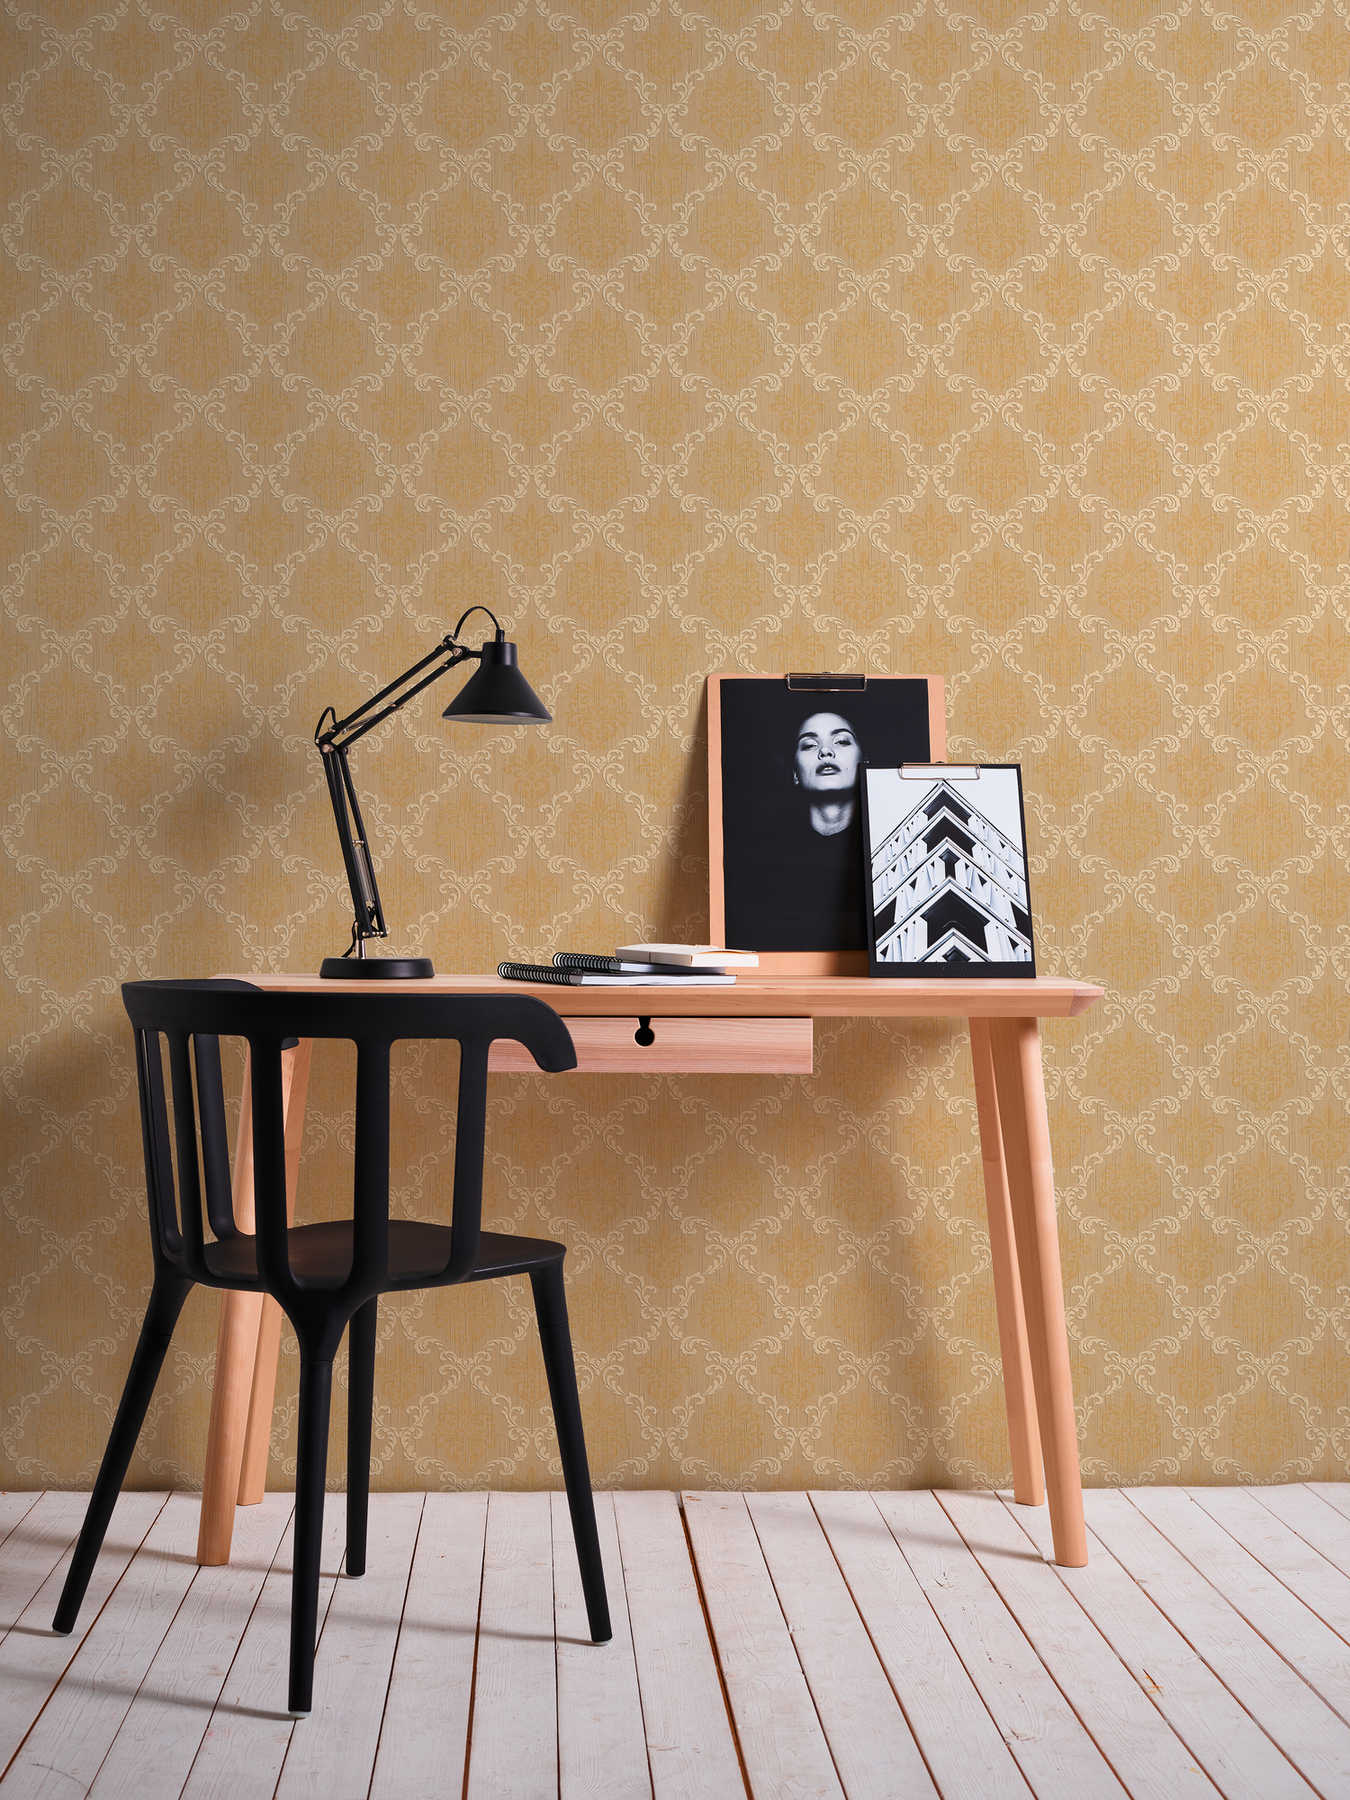             Non-woven wallpaper with textile design & ornaments with texture effect - beige
        